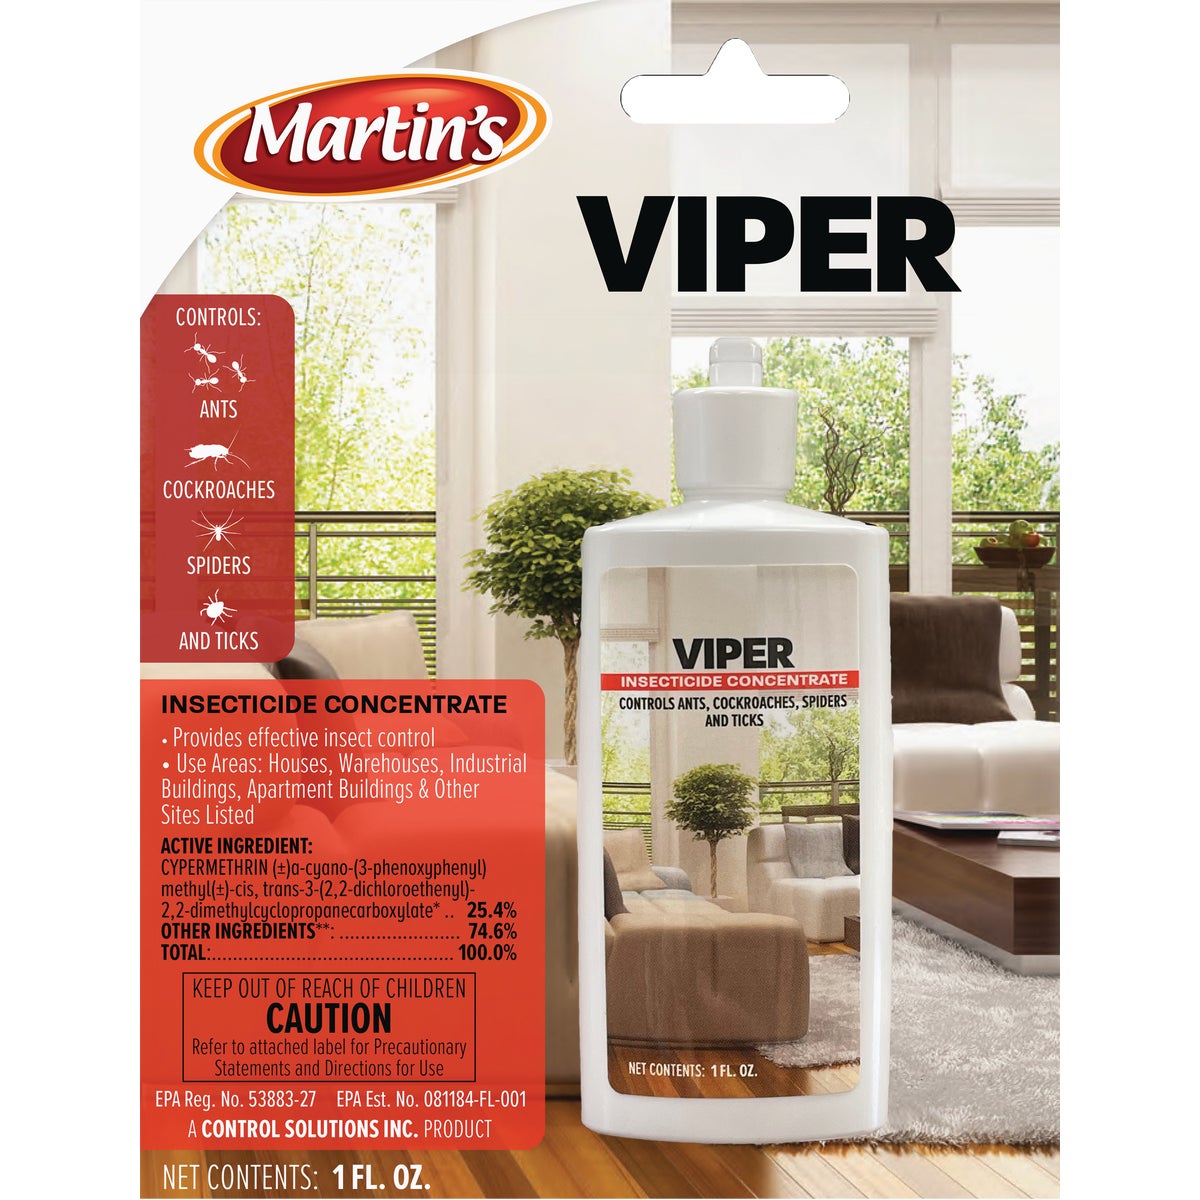 Item 703286, Viper insecticide concentrate.